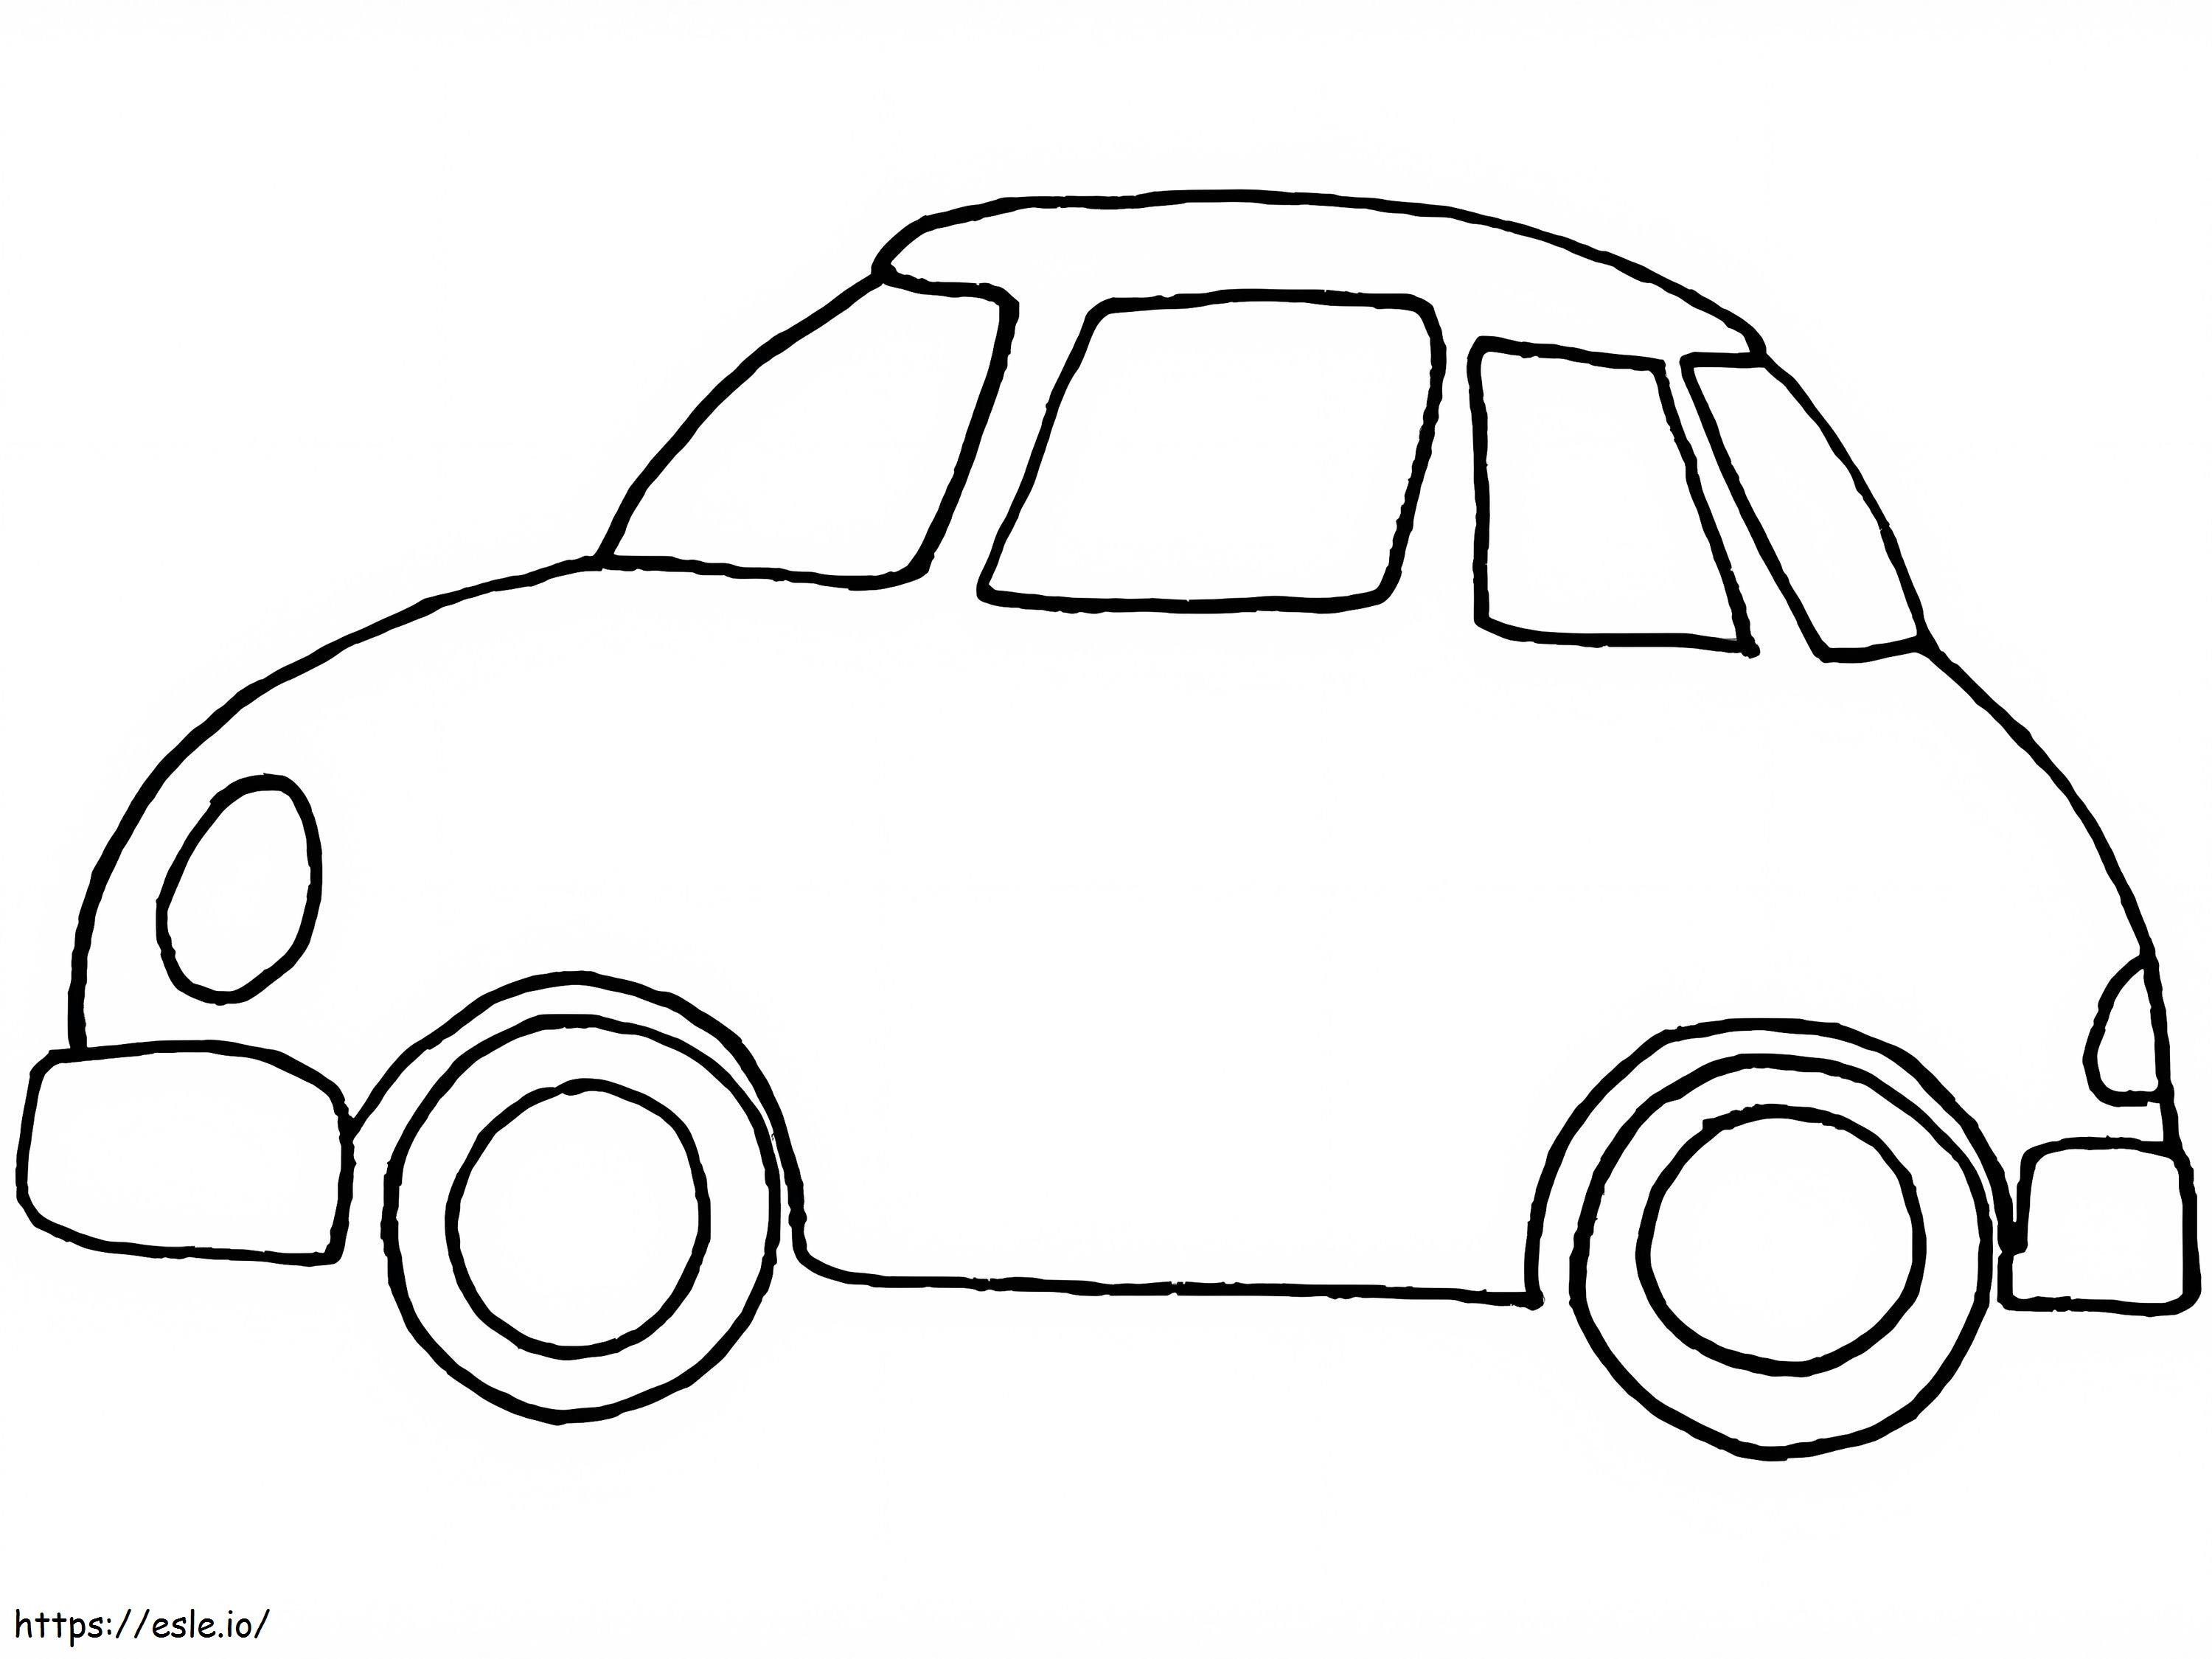 Easy Car coloring page